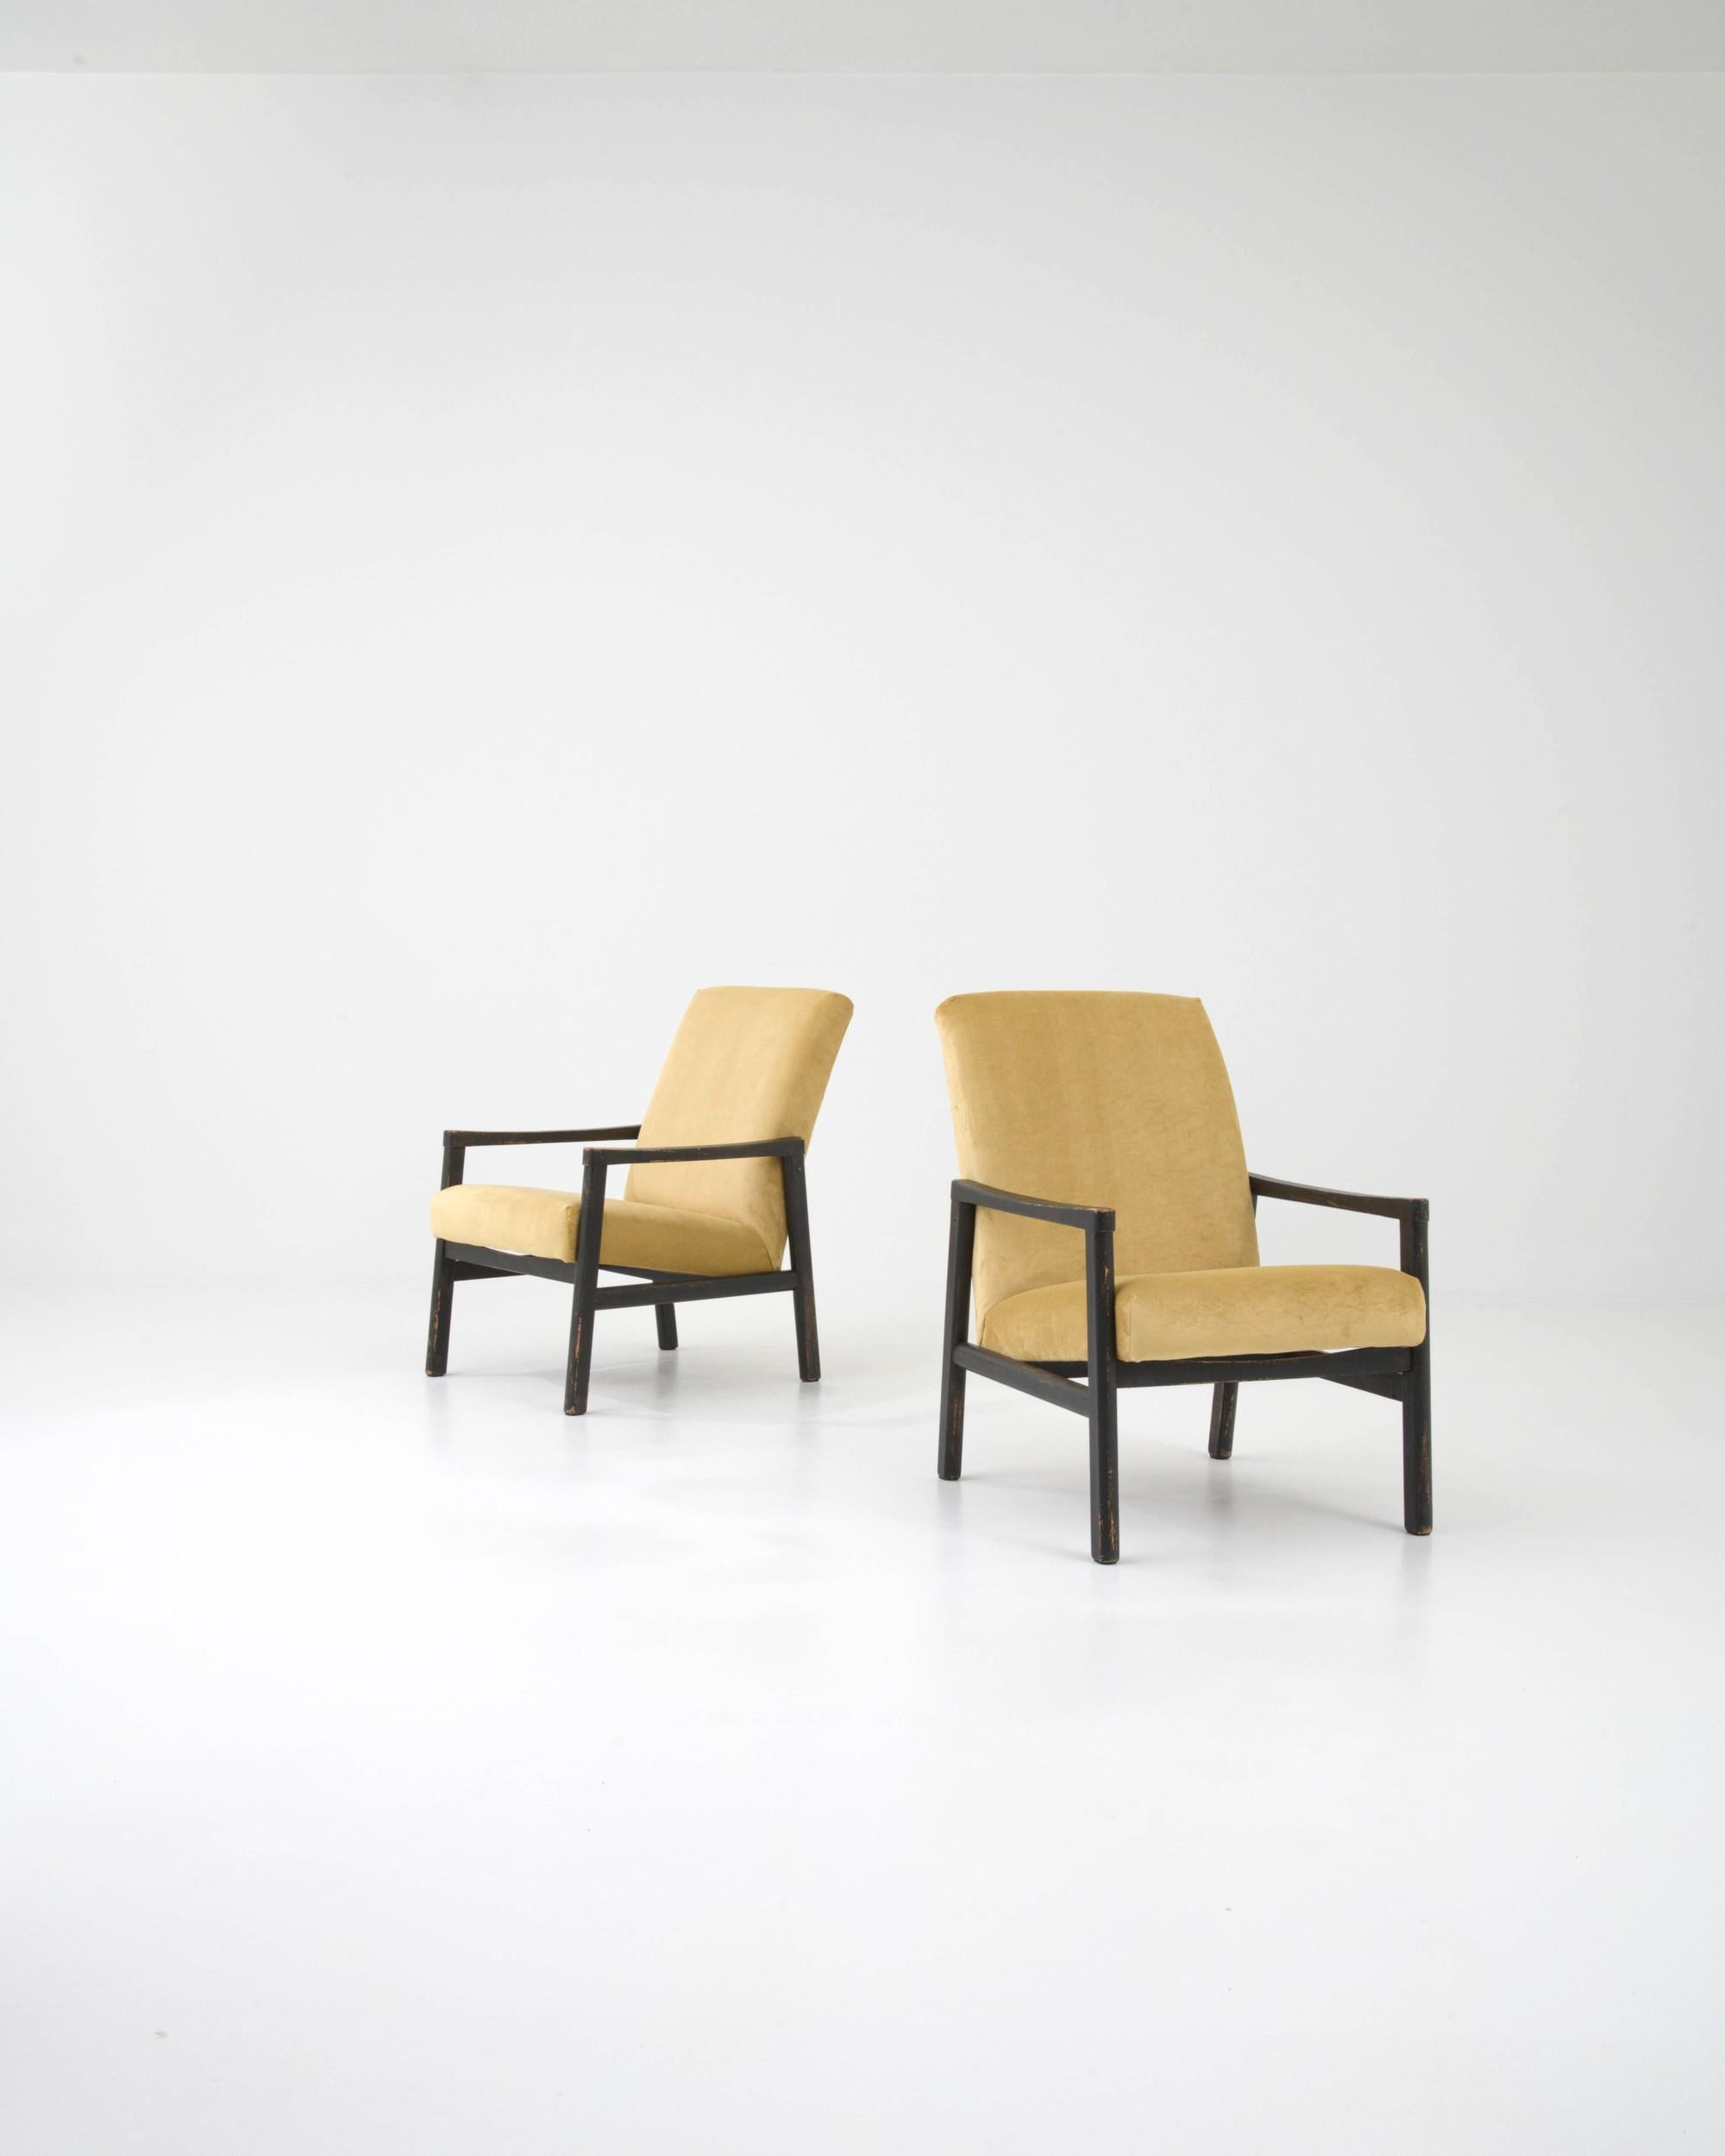 Light and stylish, this pair of Mid-Century armchairs showcase the sophistication of Central European Modernist design. Built in Czechia in the 1960s, the clean angles of the wooden frame creates an eye-catching profile. The cushioned seat is set at